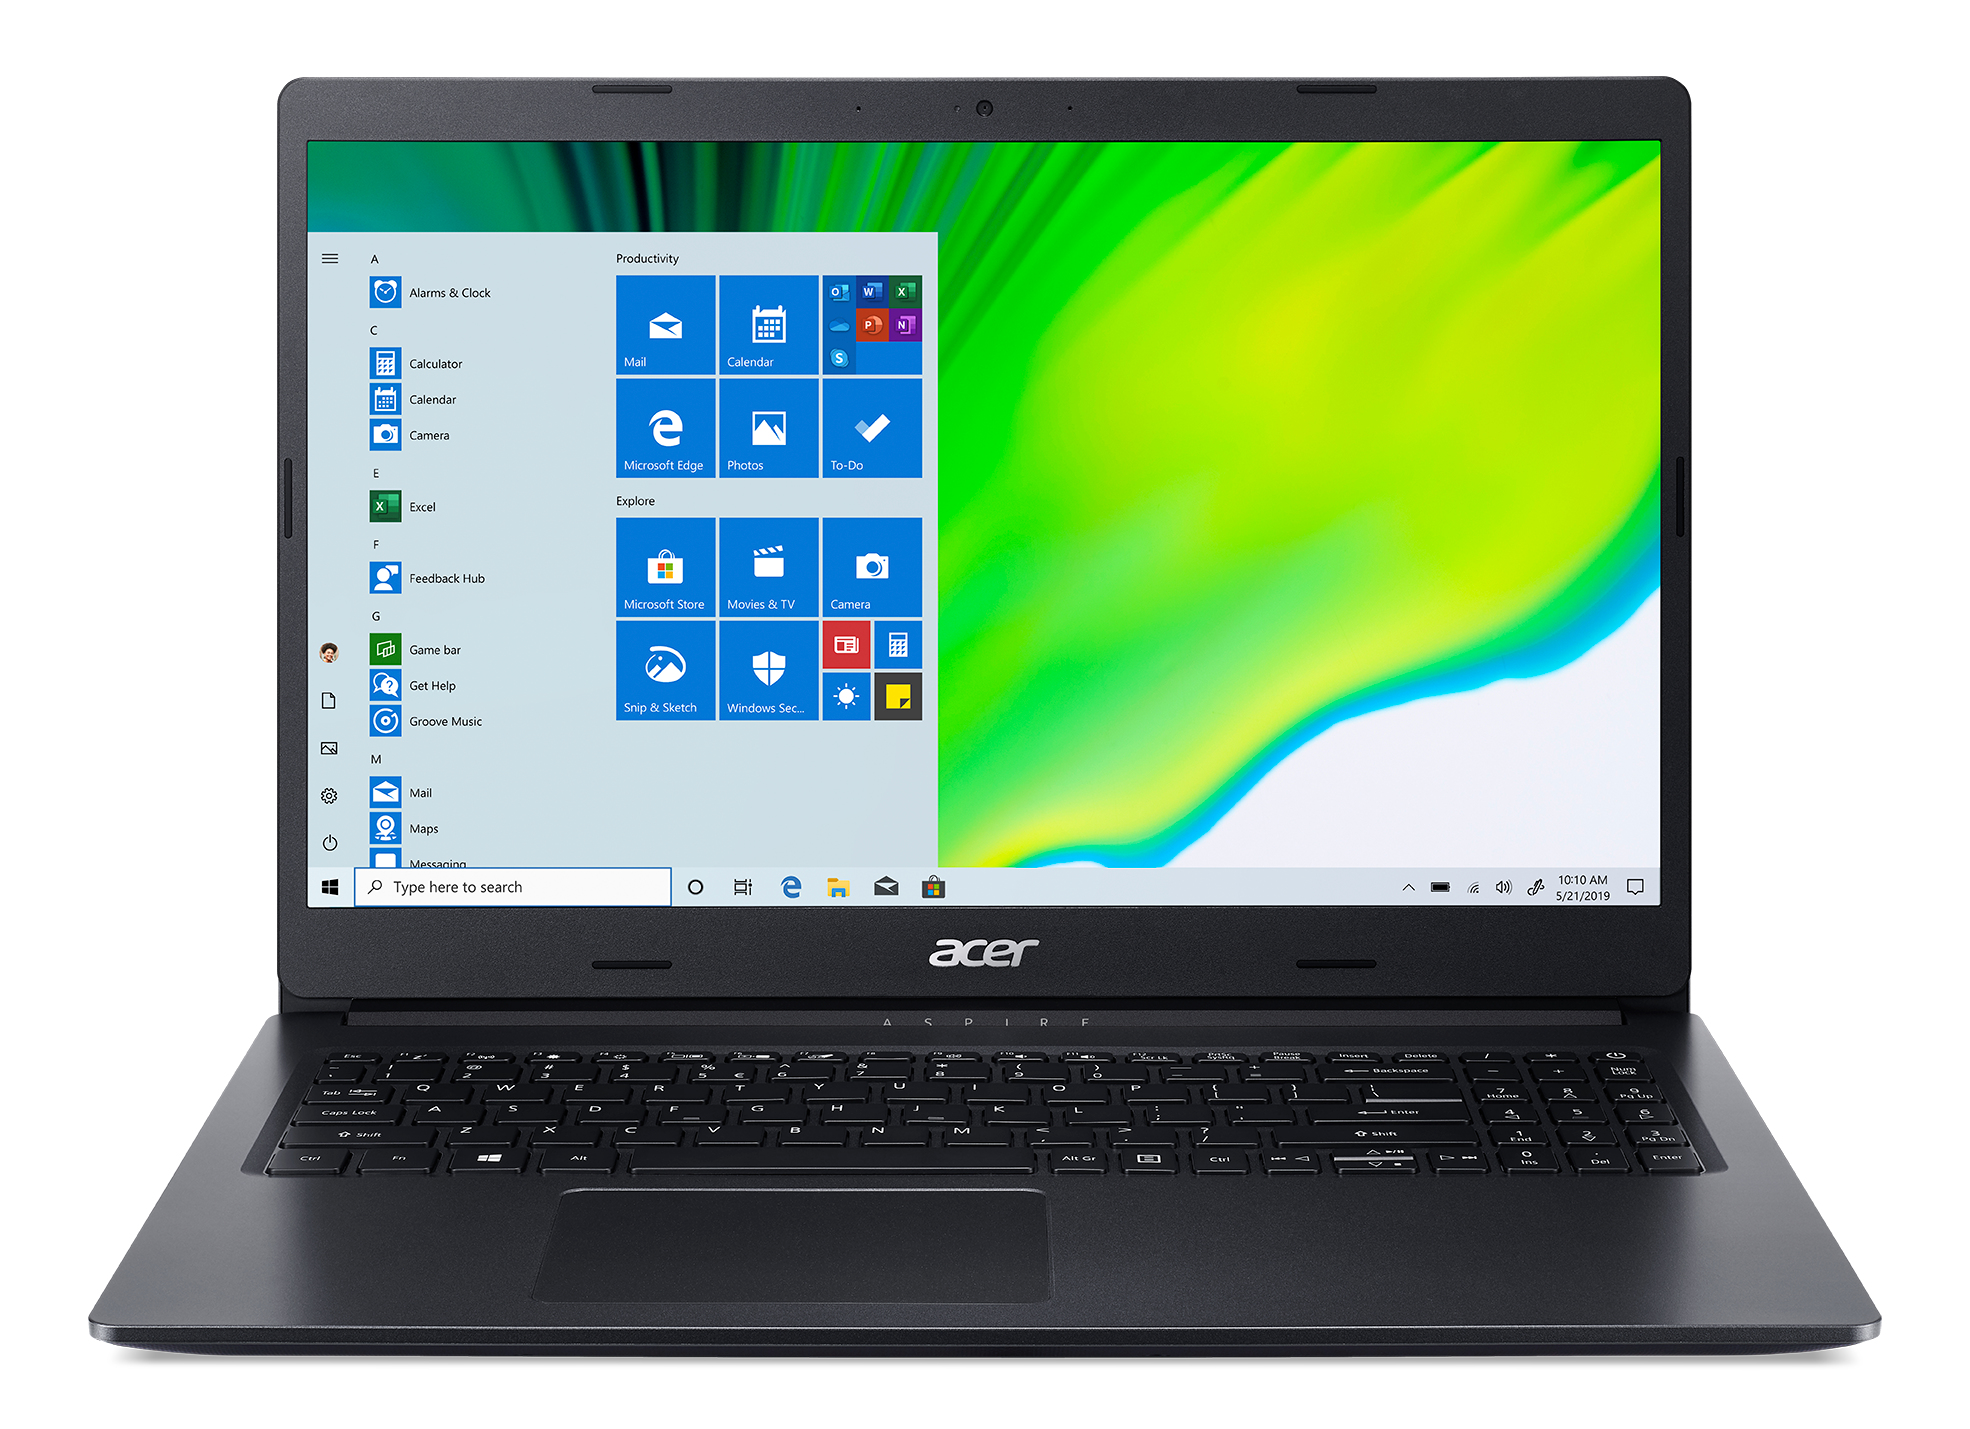 Acer Aspire 3 A315-57G-78SP, 15.6inch FHD ComfyView, i7-1065G7, 8GB DDR4, 512GTB PCIe NVMe SSD, MX330 graphics, Win 10 Home